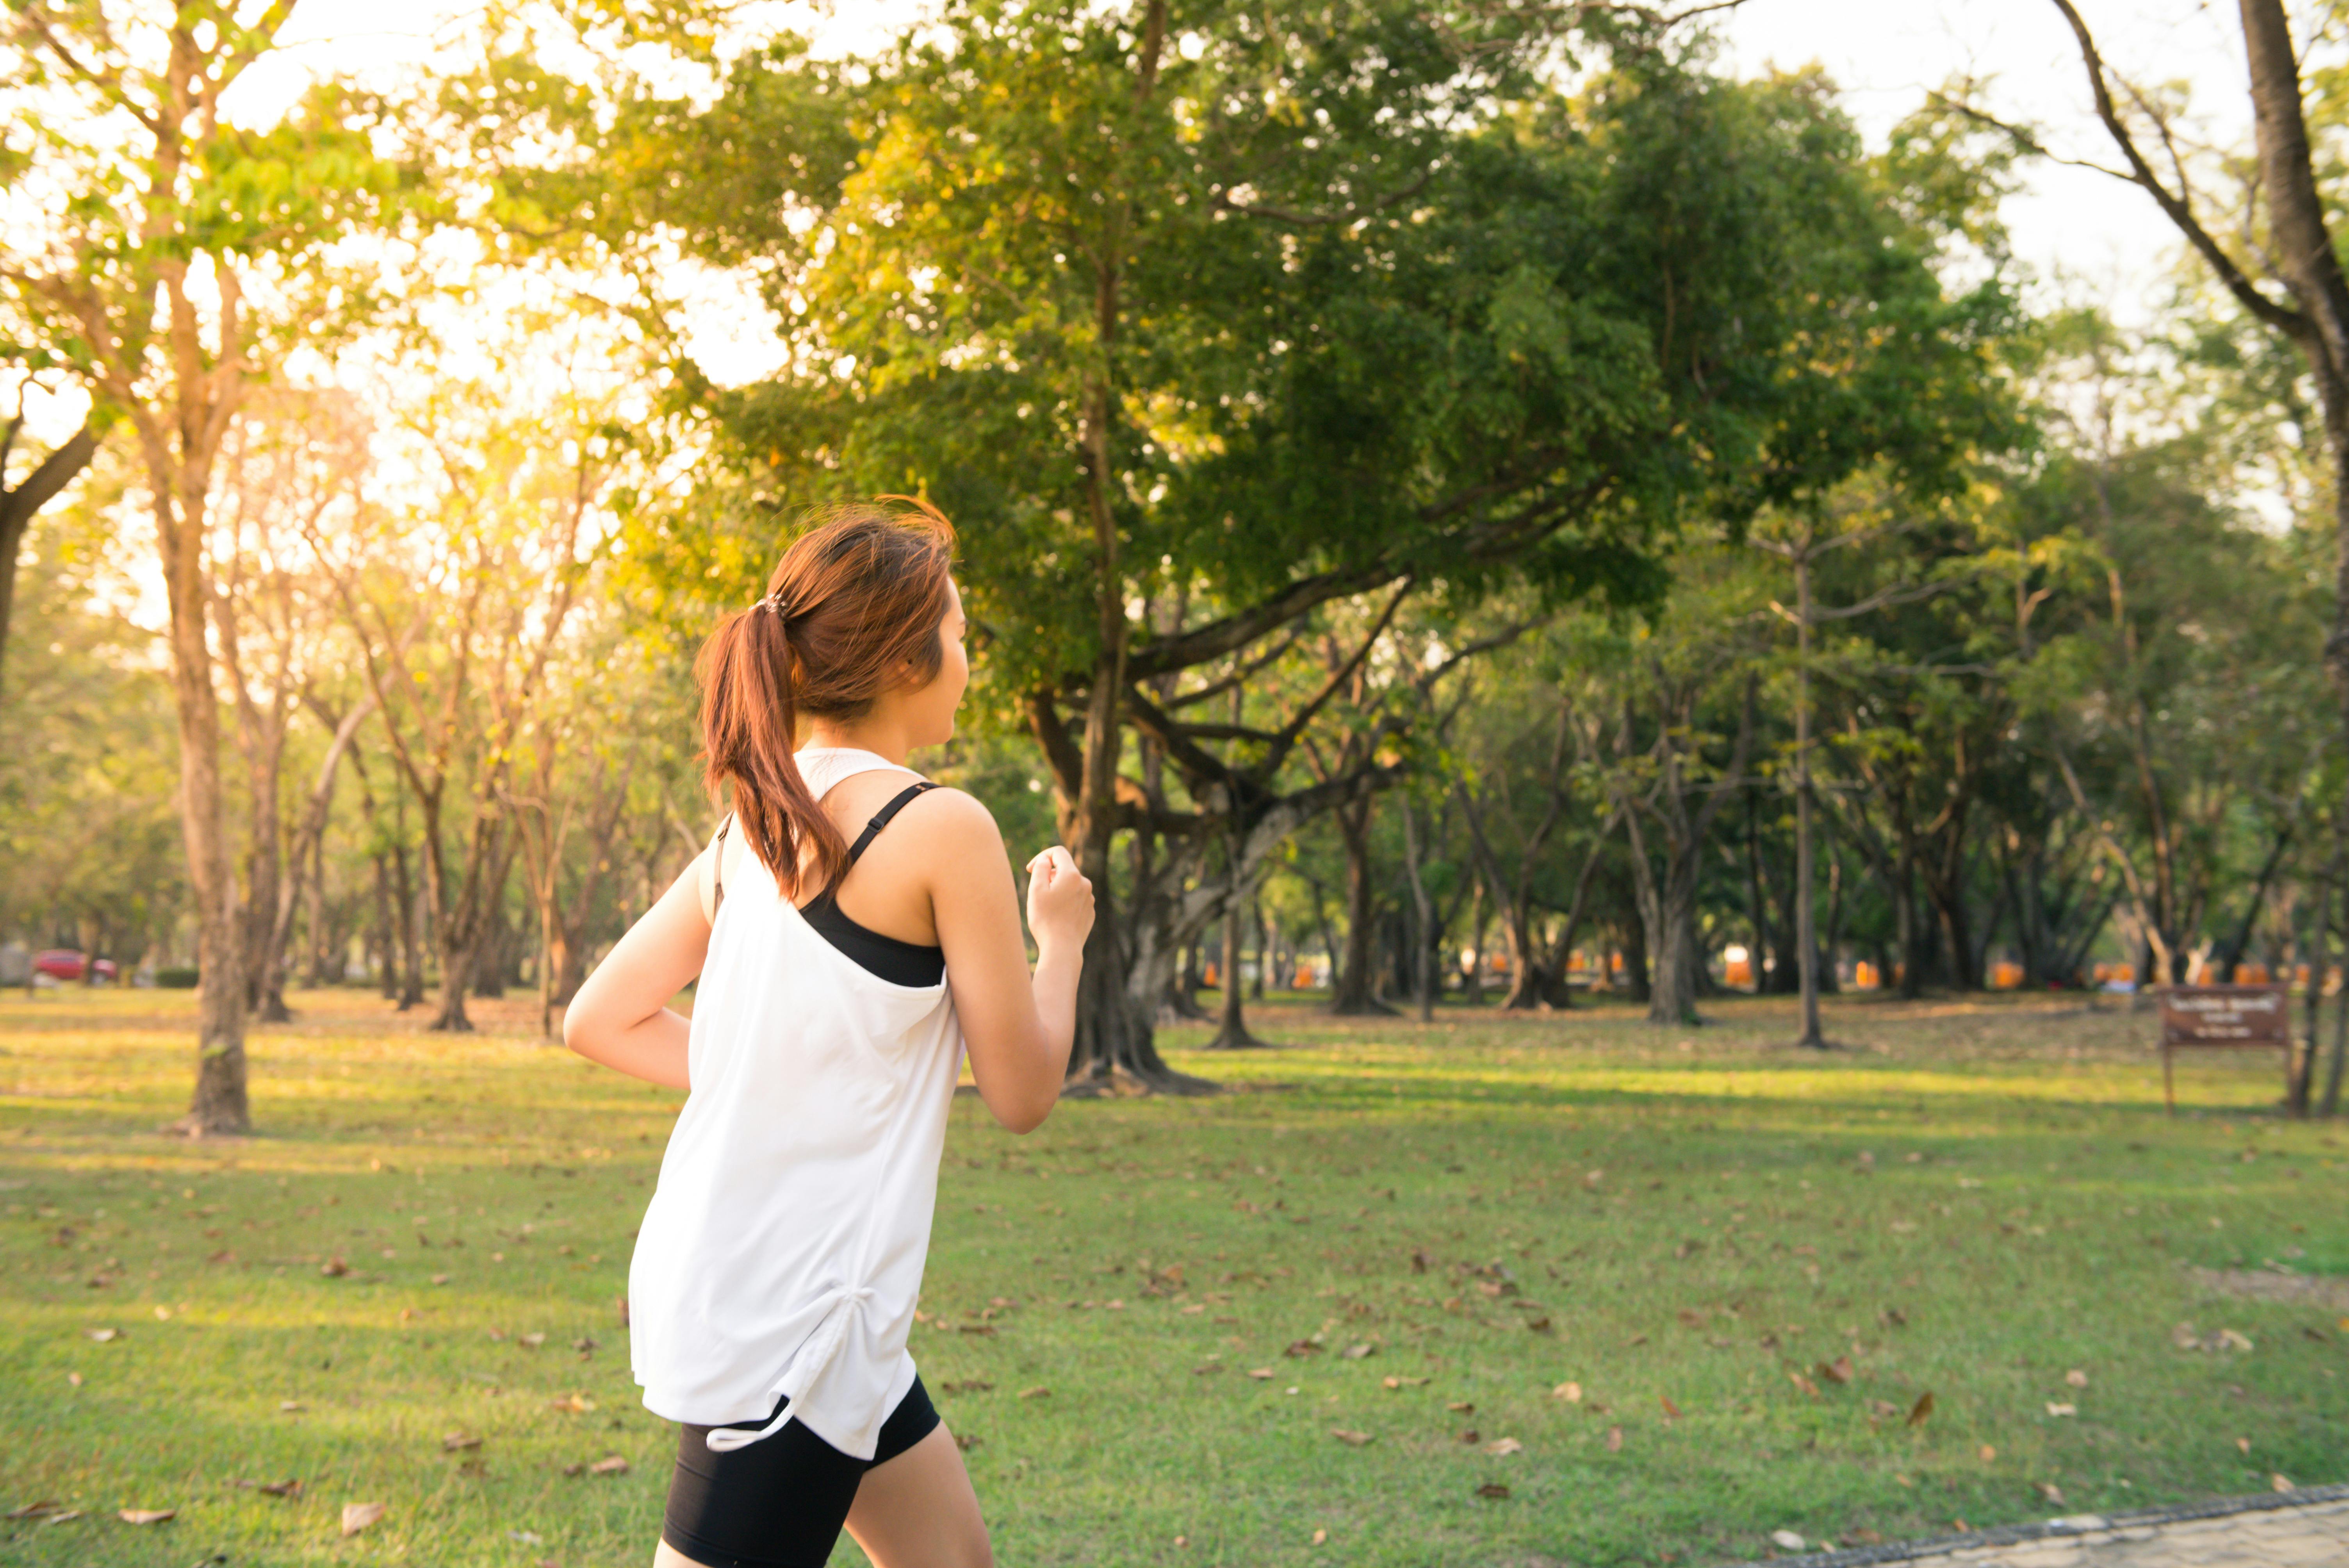 Woman about to run during golden hour. | Photo: Pexels